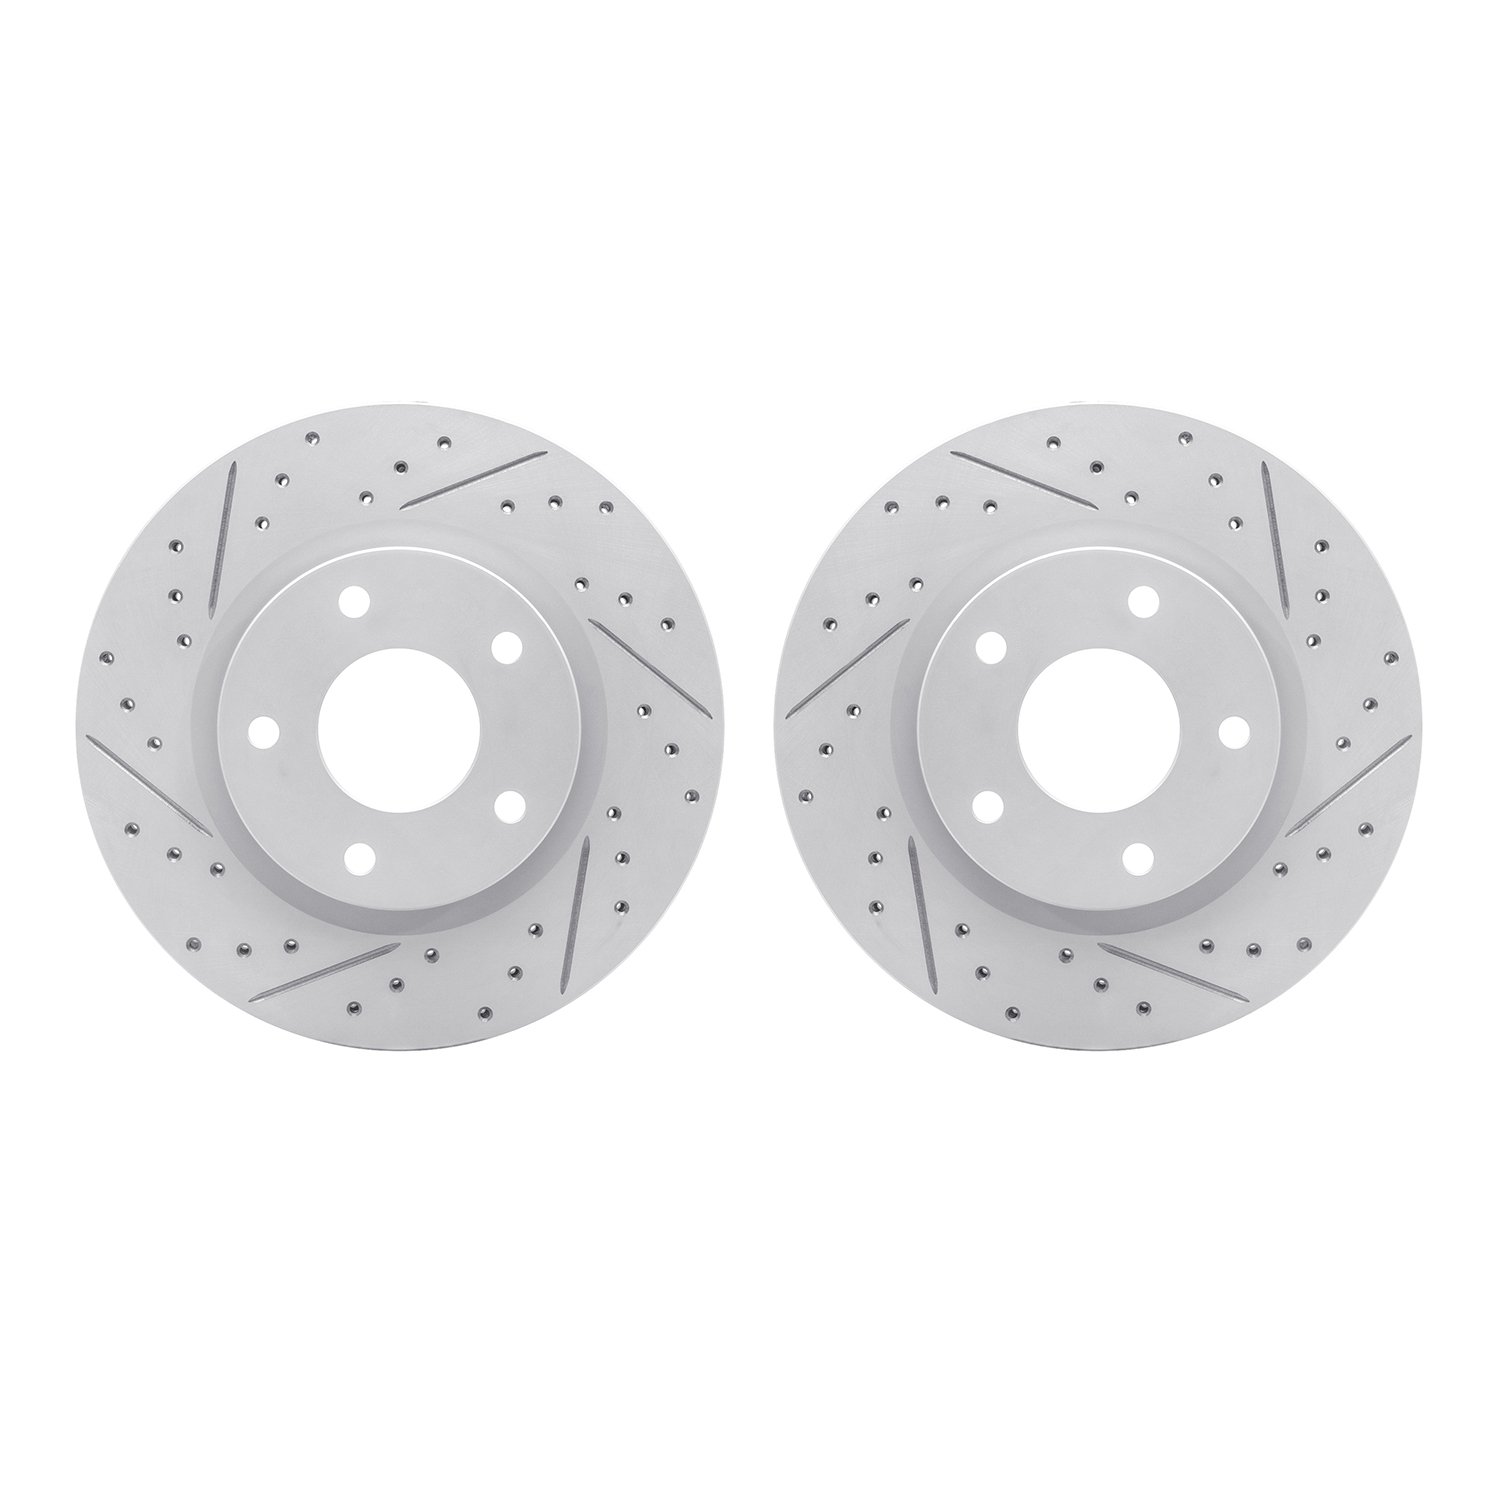 2002-67039 Geoperformance Drilled/Slotted Brake Rotors, 2013-2019 Infiniti/Nissan, Position: Front